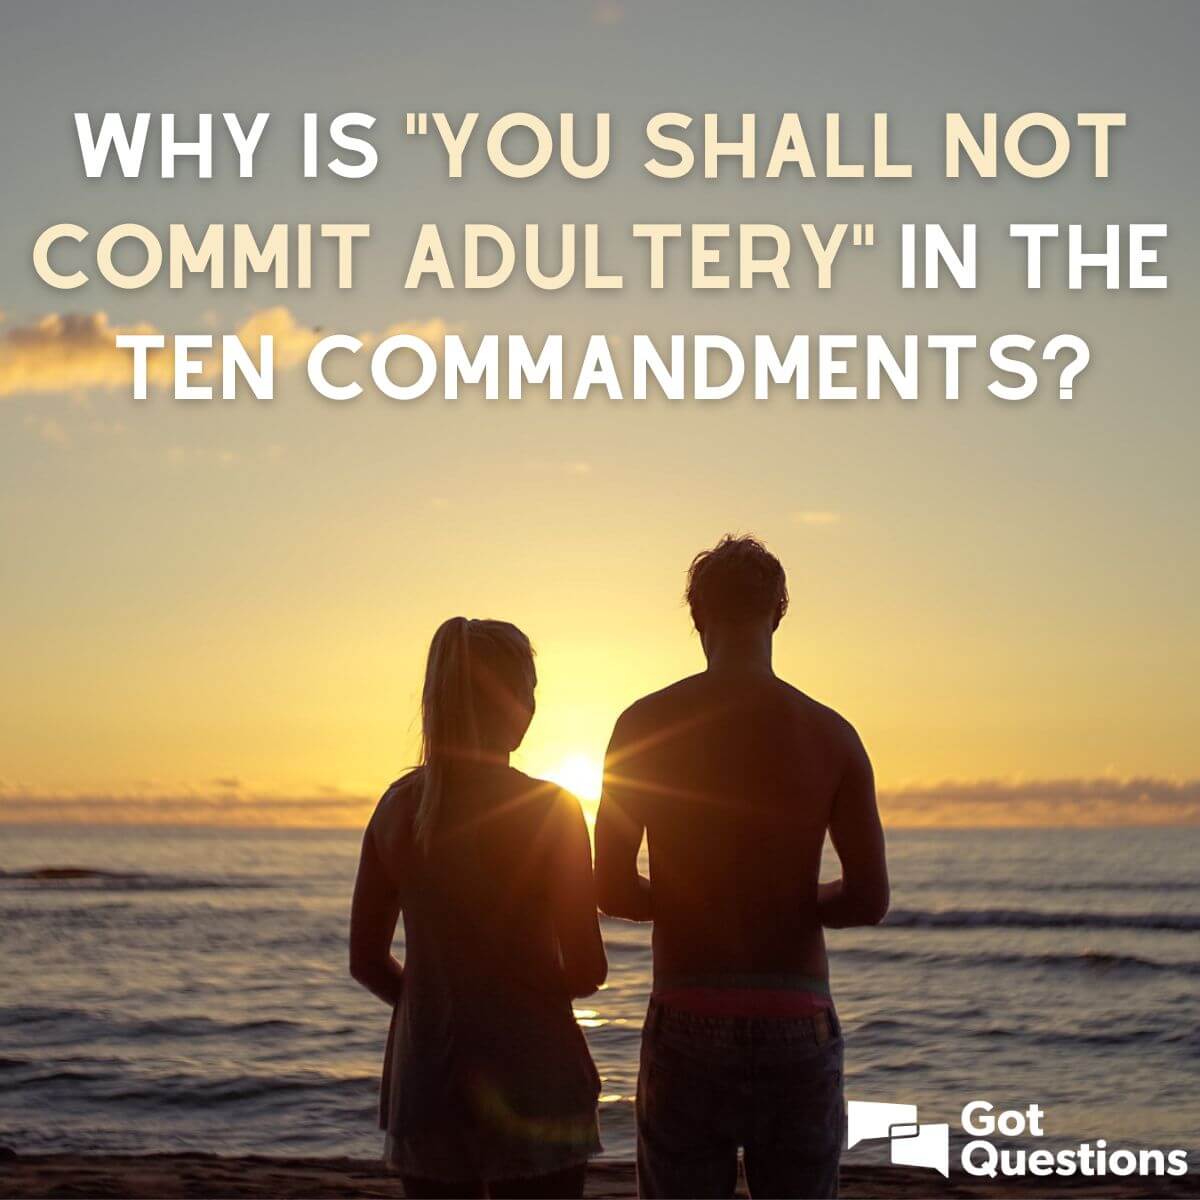 who committed adultery in the bible